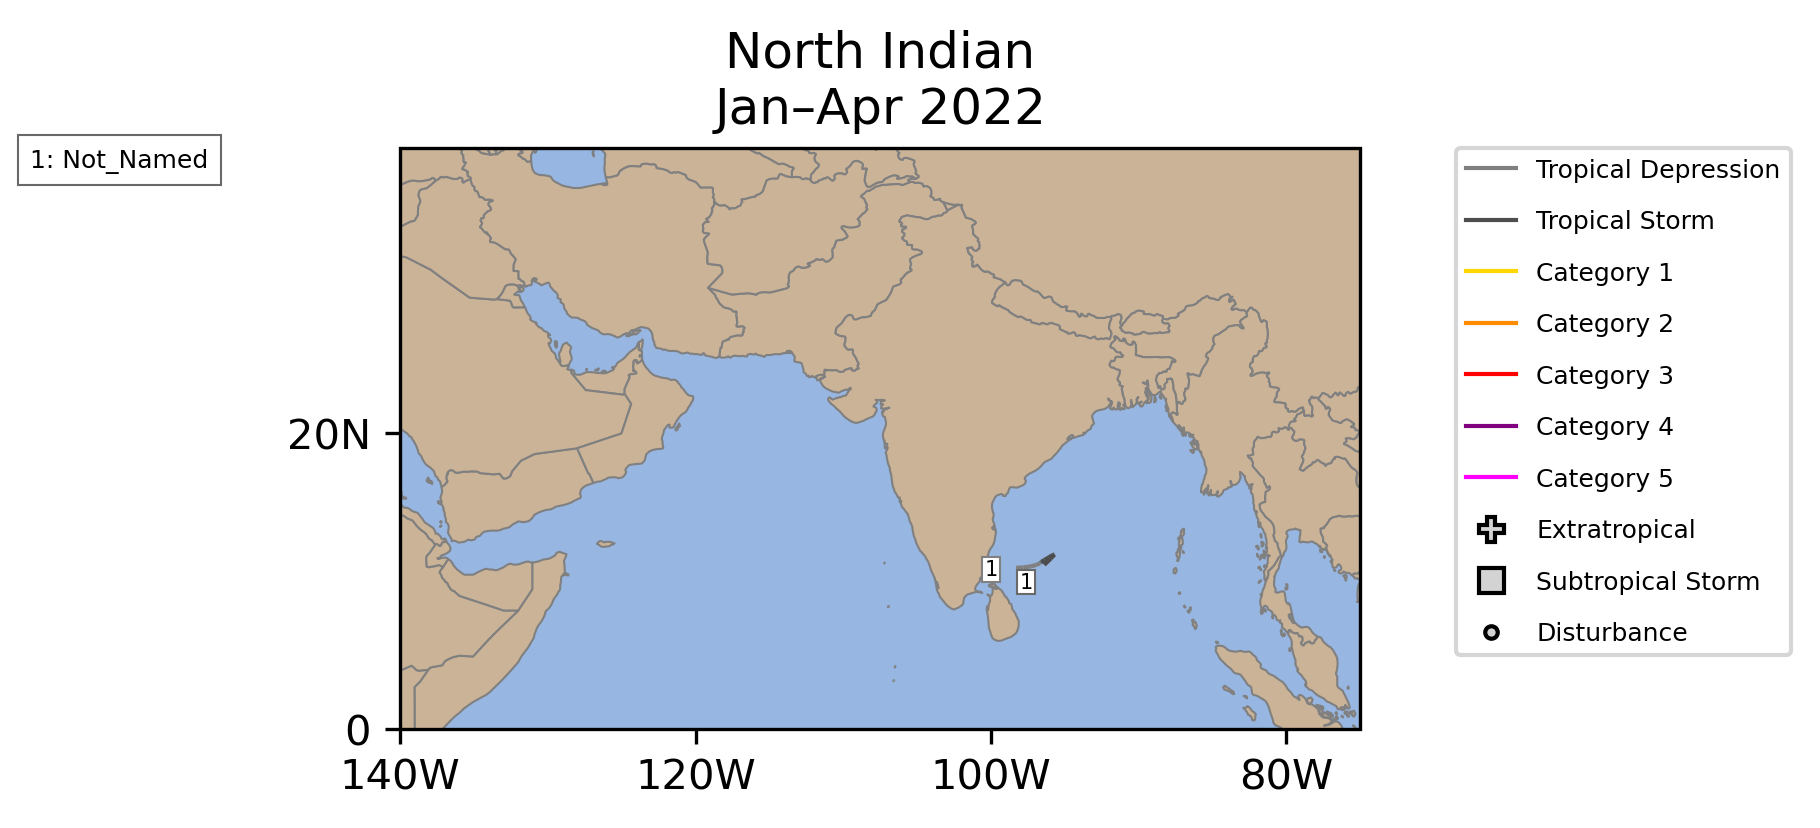 North Indian Tropical Cyclone Storm Tracks January-April 2022